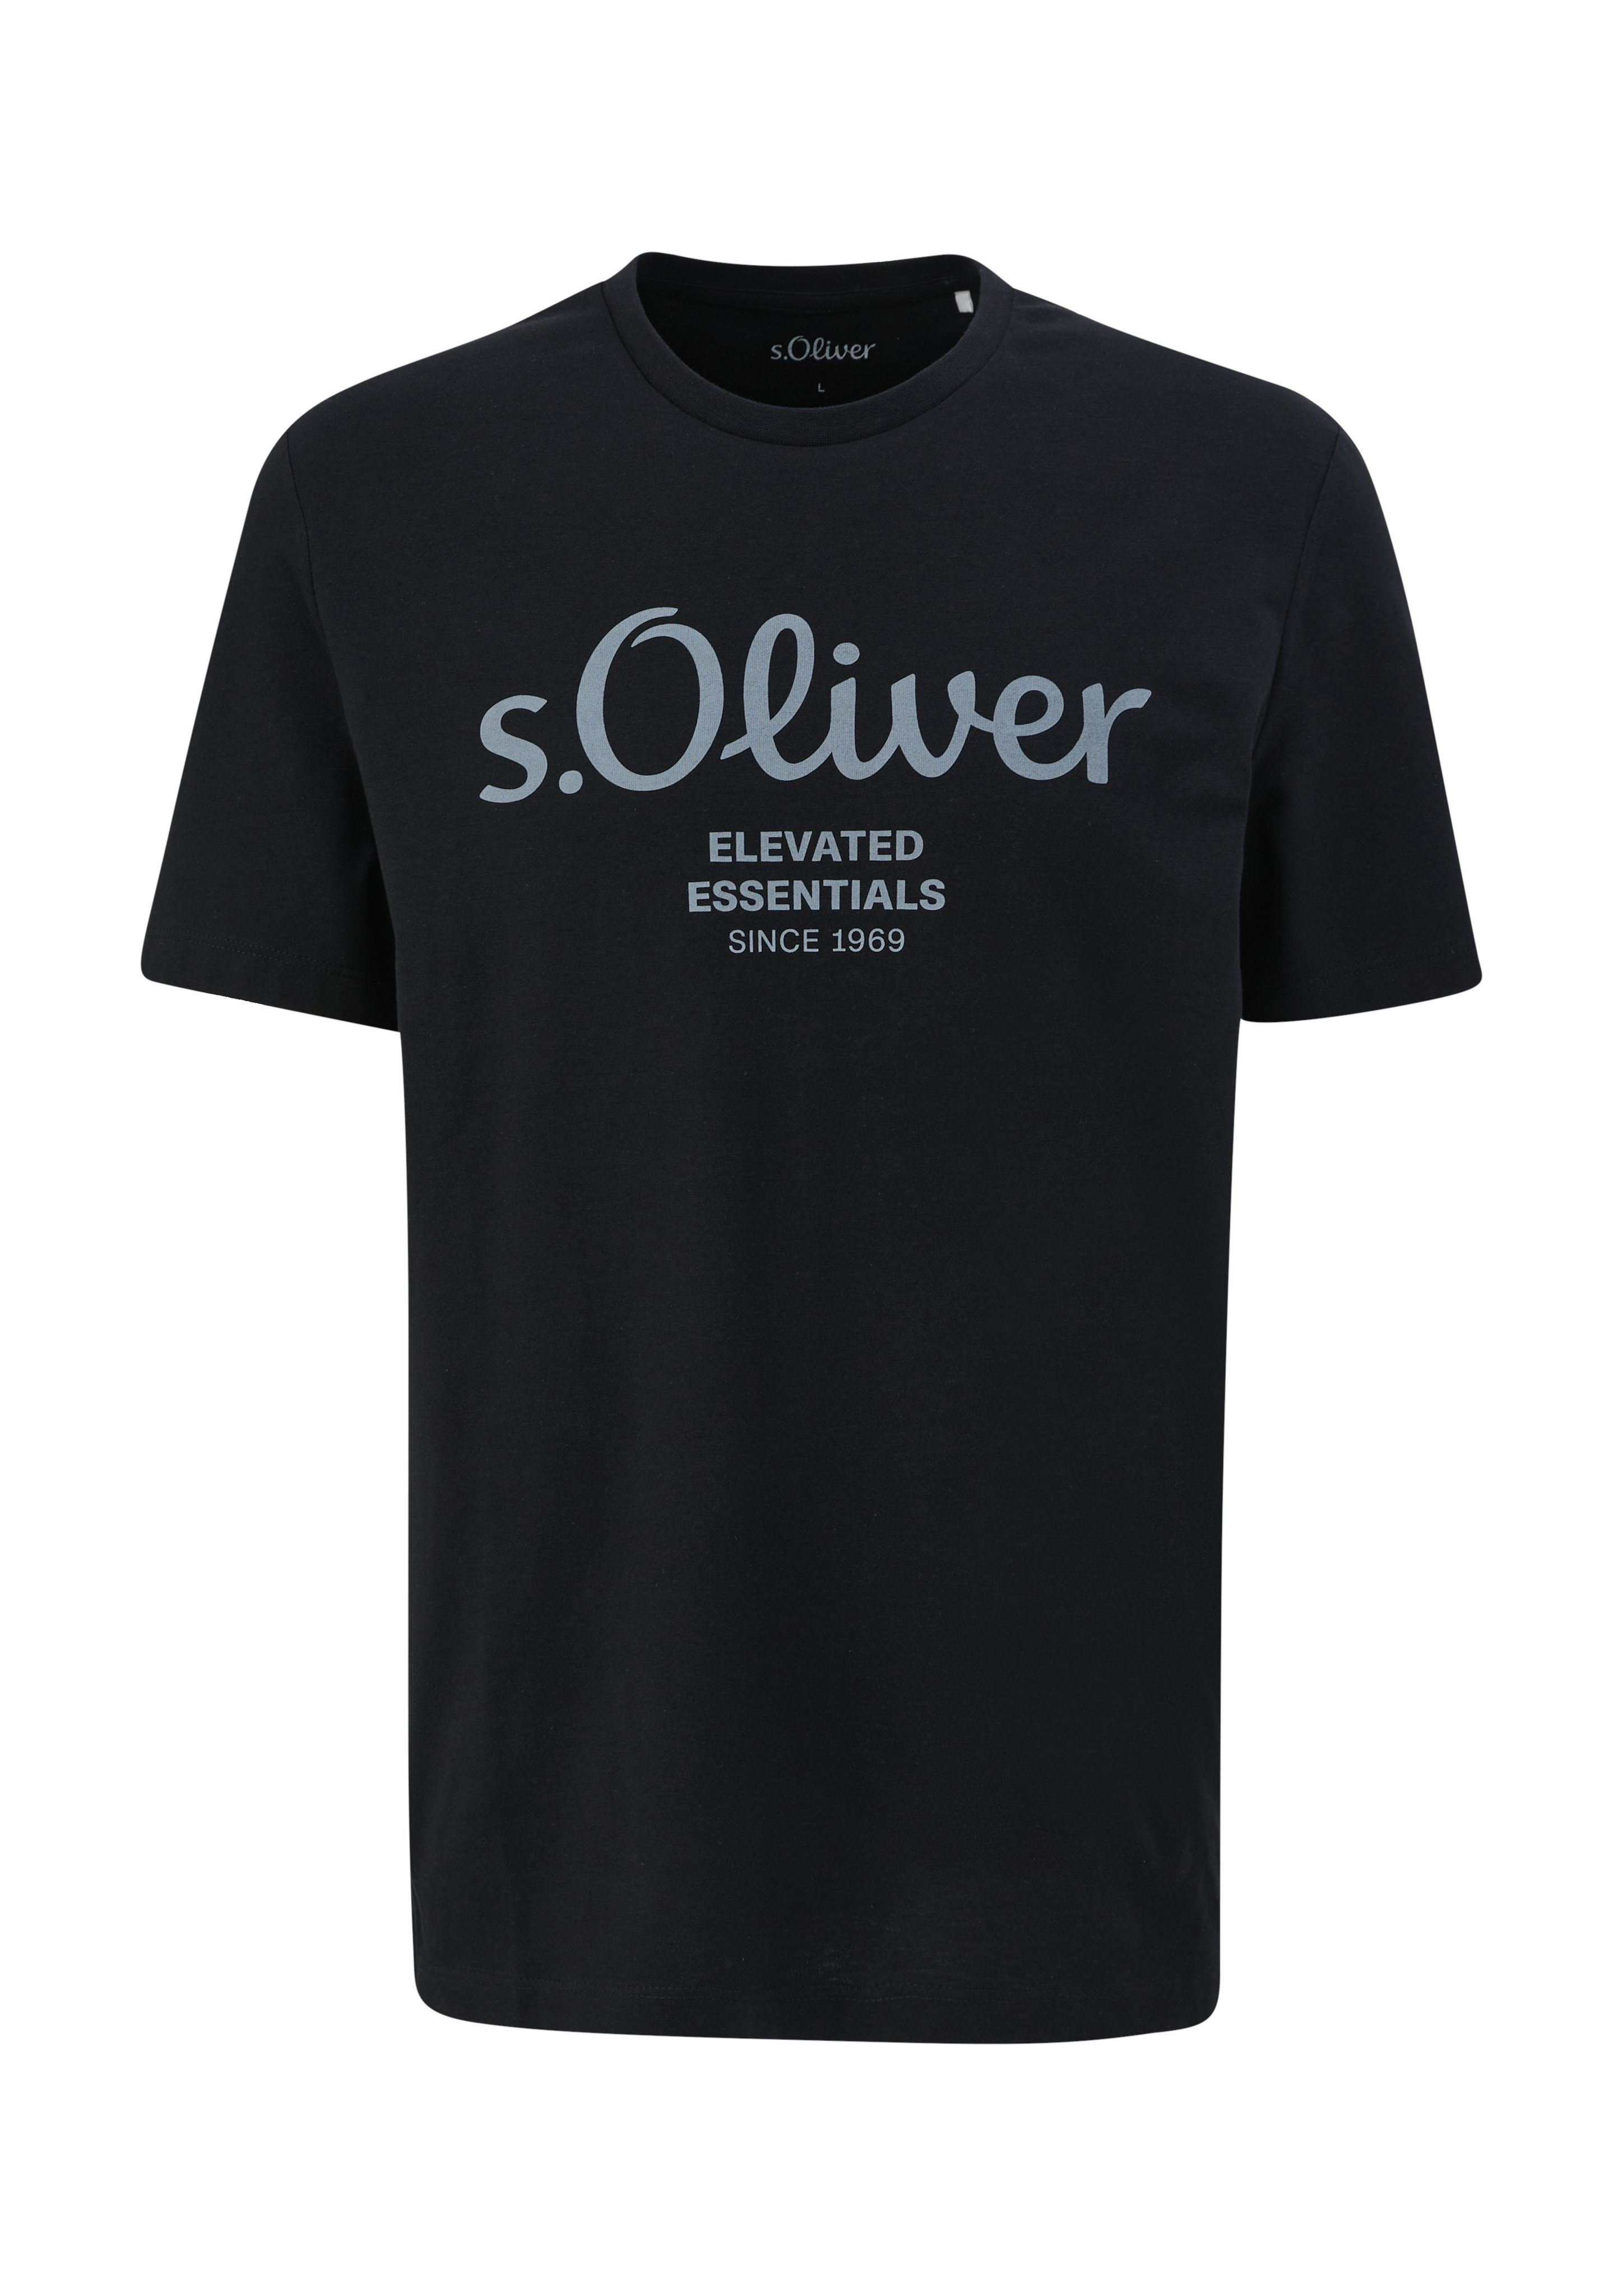 sportiven Look T-Shirt black s.Oliver im